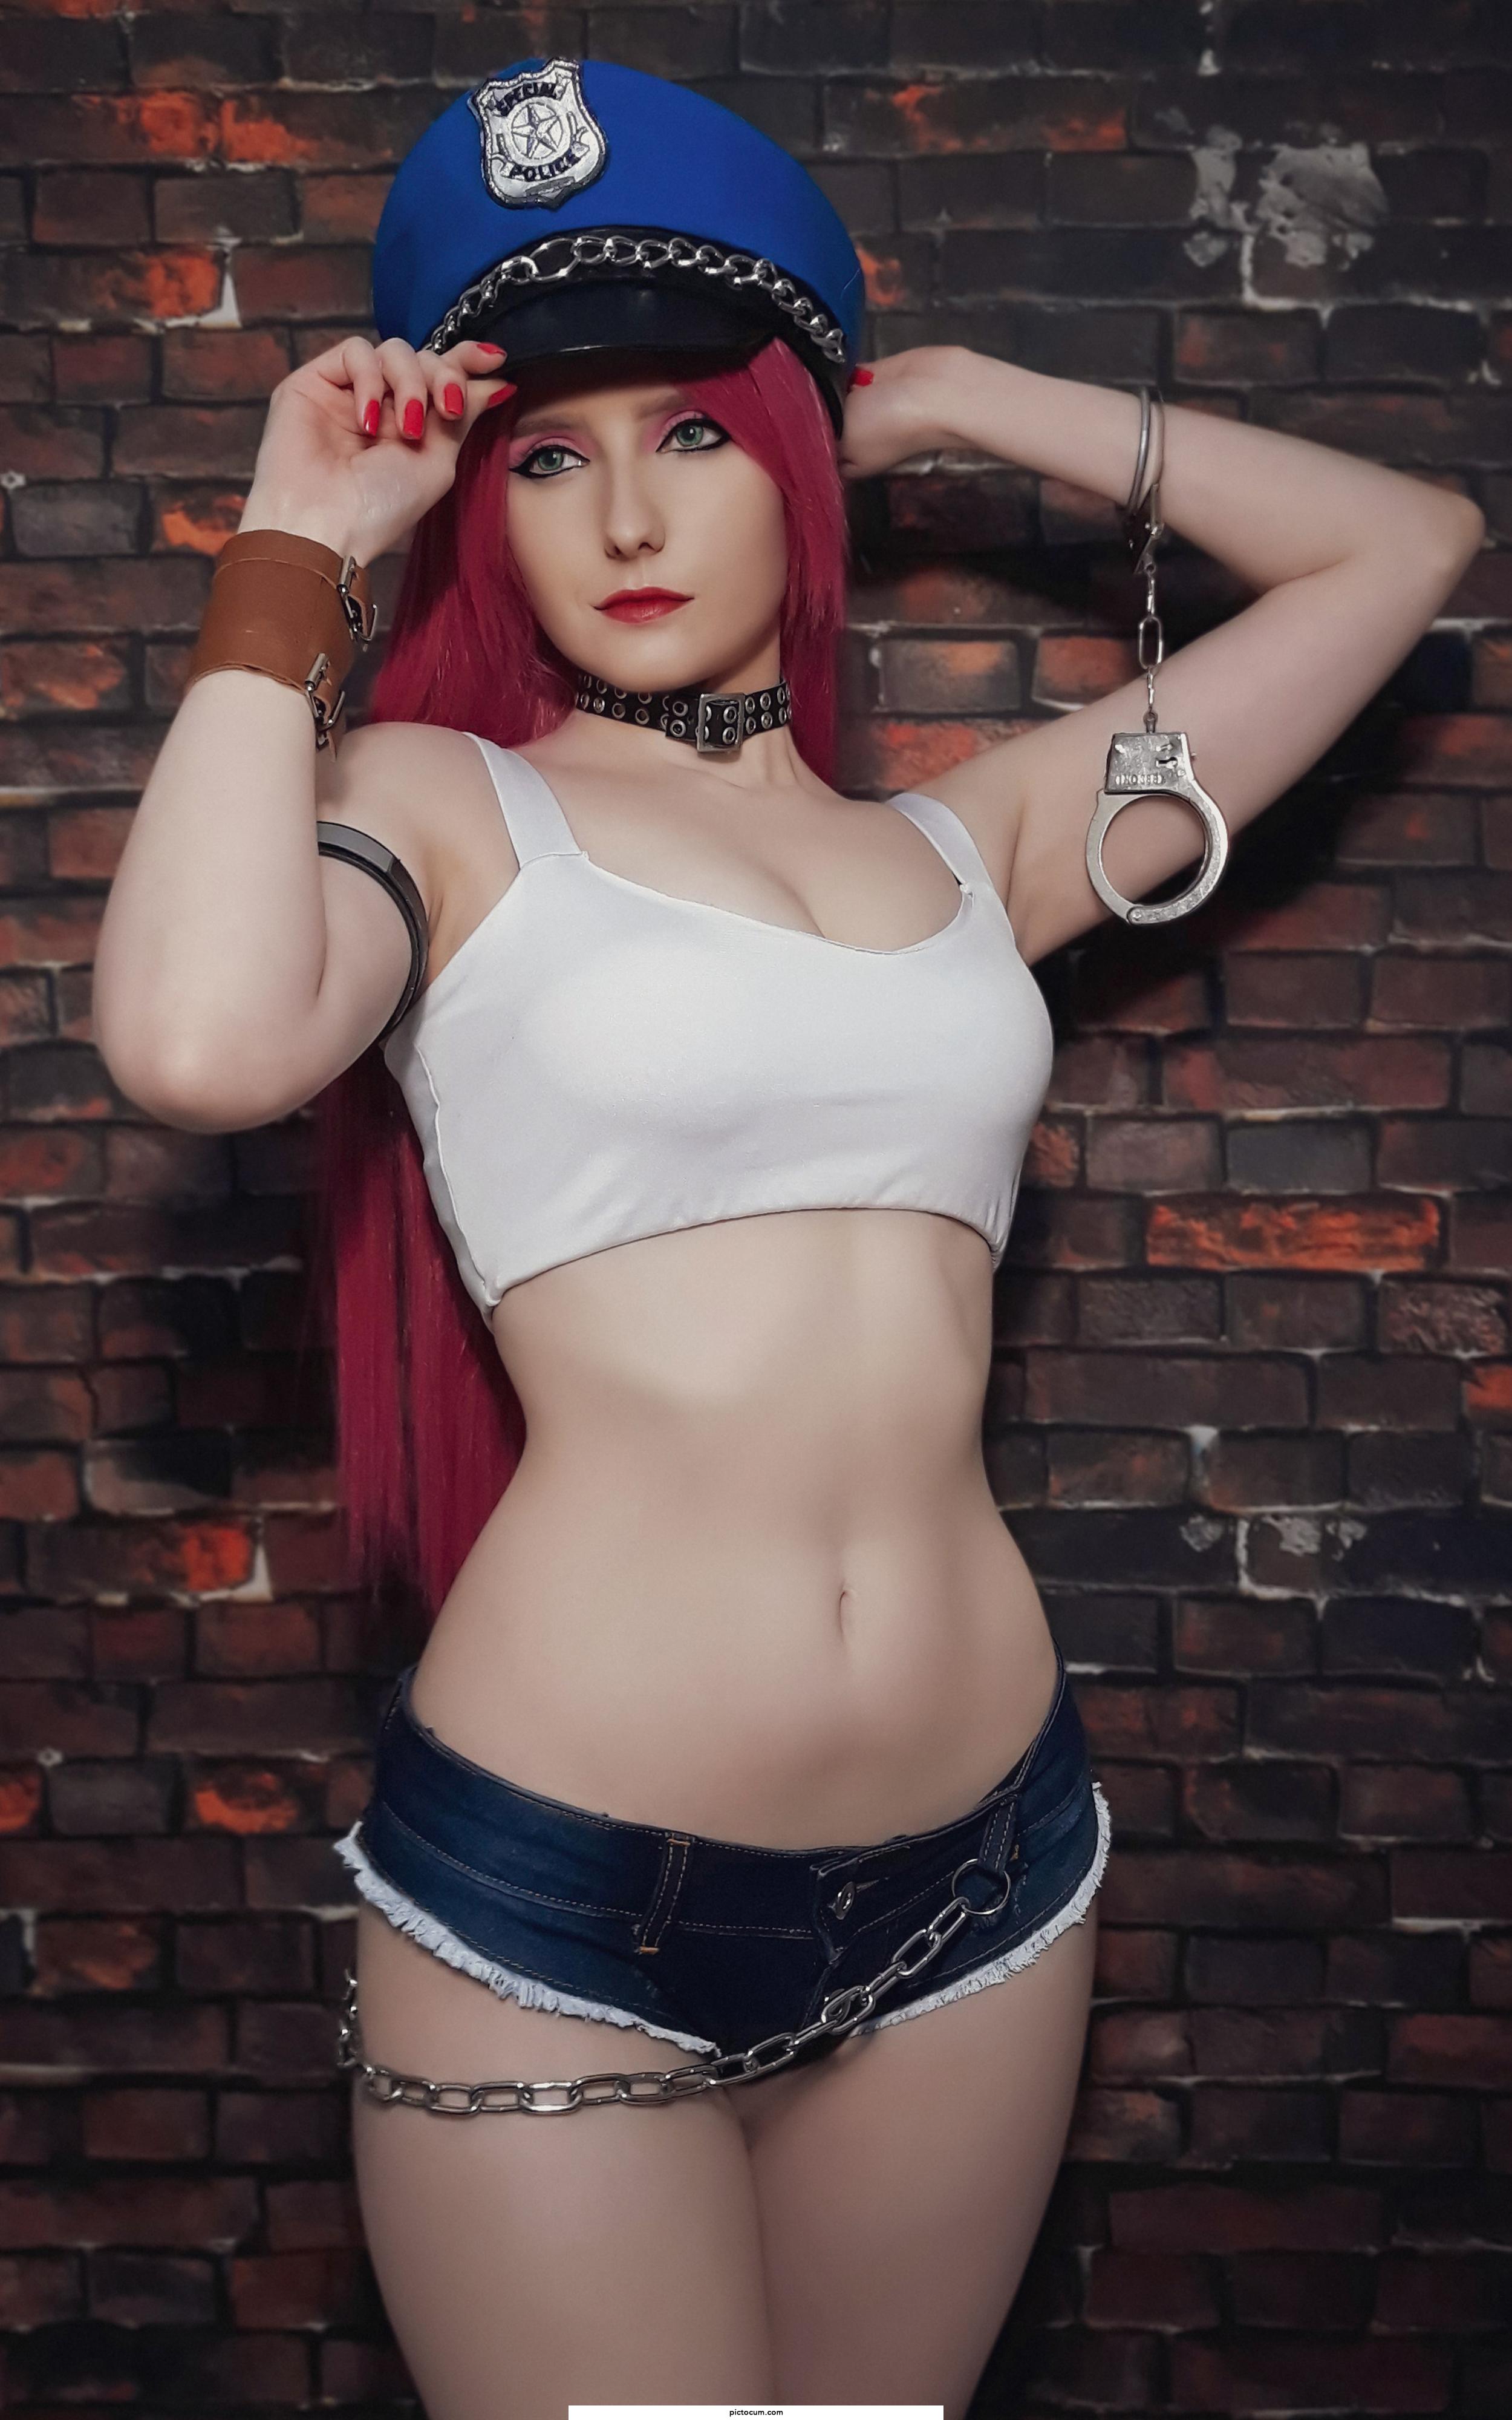 Poison from Street Fighter